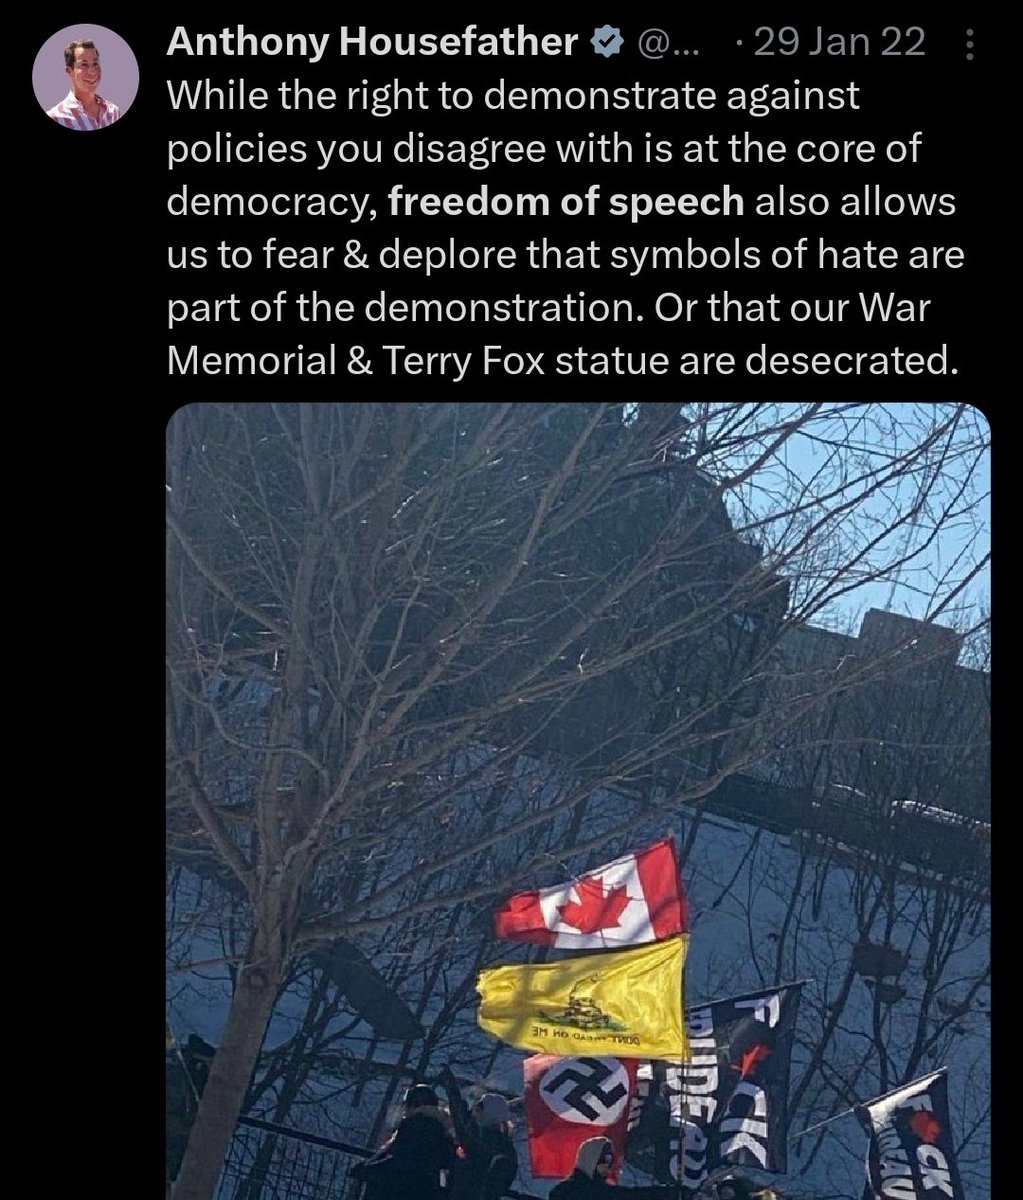 Just to be clear: Anthony Housefather made a stronger statement against students protesting the genocide of Palestinians in Gaza at the hands of the IDF than he did of the guy waving the Nazi Swastika in front of Parliament. #cdnpoli #CampusProtests #FreePalestine